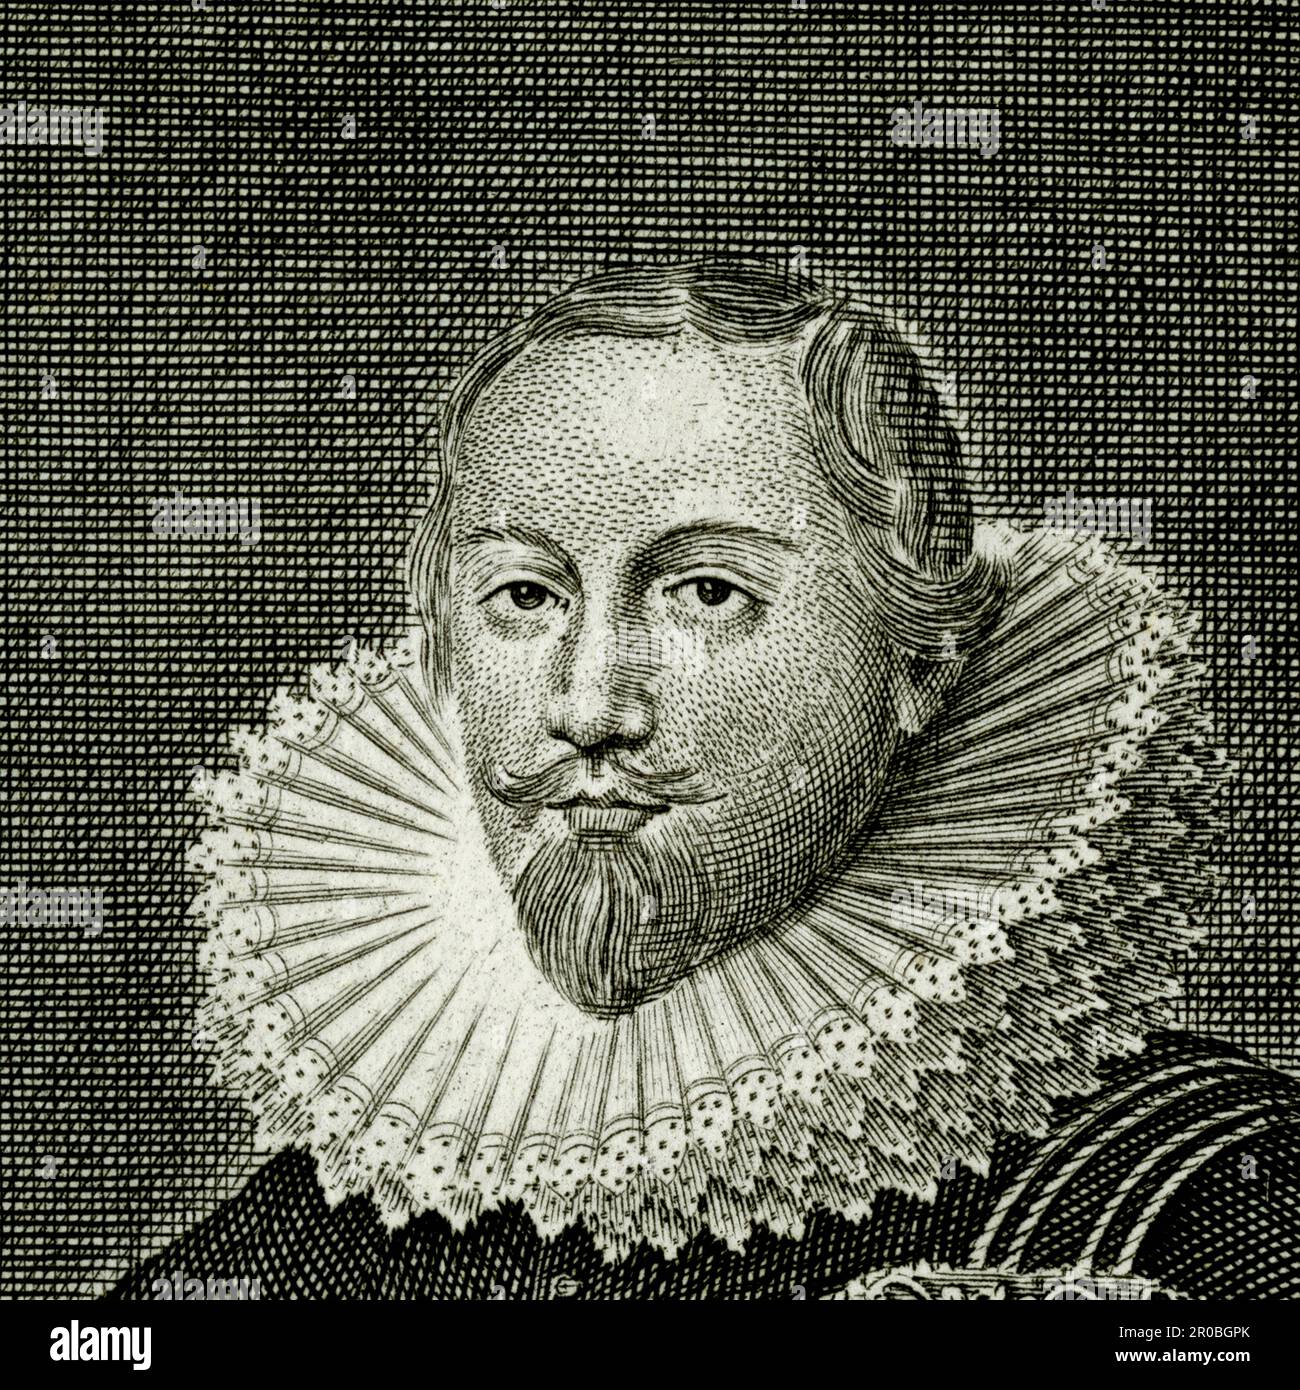 Sir Thomas Coventry (1578-1640), 1st Baron Coventry, Lord Keeper of the Great Seal of England from 1625 to 1640 and firm supporter of King Charles I in the run-up to the English Civil War. Square detail of an engraving created in the 1700s by Michael Vandergucht (1660-1725), after a portrait by Cornelius Johnson (1593-1661). Stock Photo